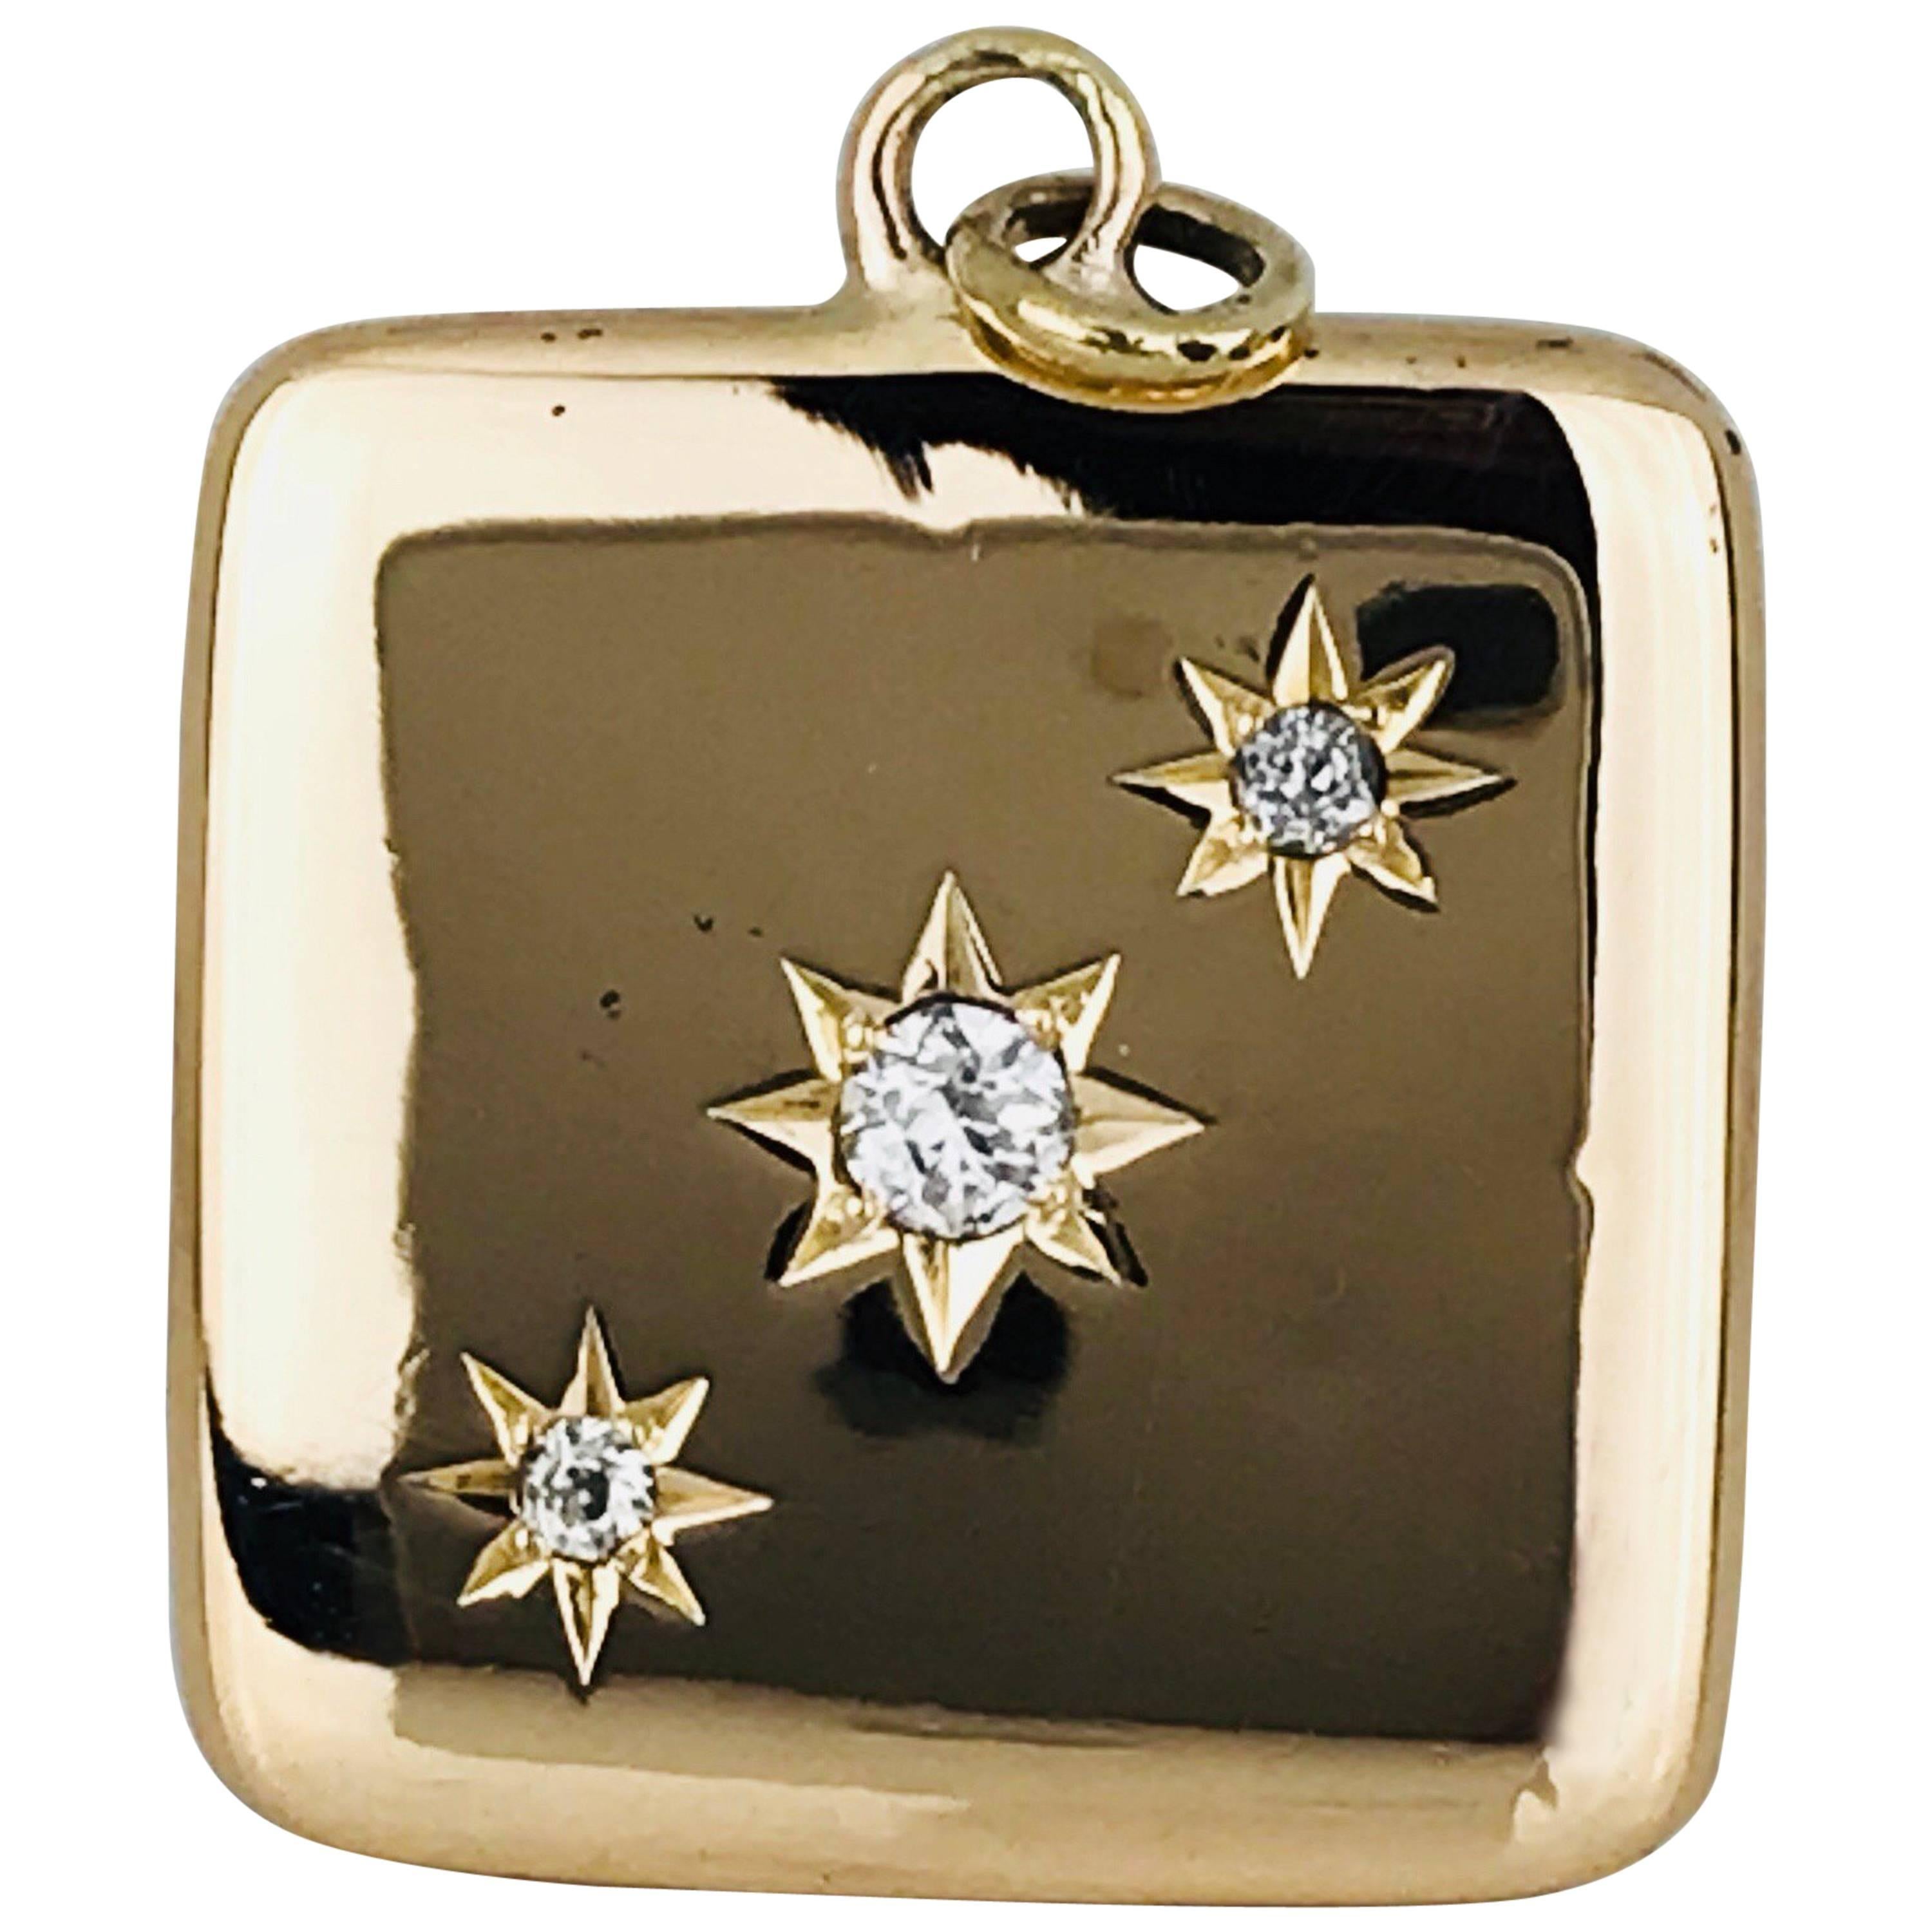 Highly polished, 14 karat yellow gold, square photo locket opens from the top and features 3 round brilliant, bead-set diamonds European-cut in a diagonal line.
Edwardian Circa 1900's

Diamonds measure 3.4 and 2.4 millimeters, with a quality of SI1